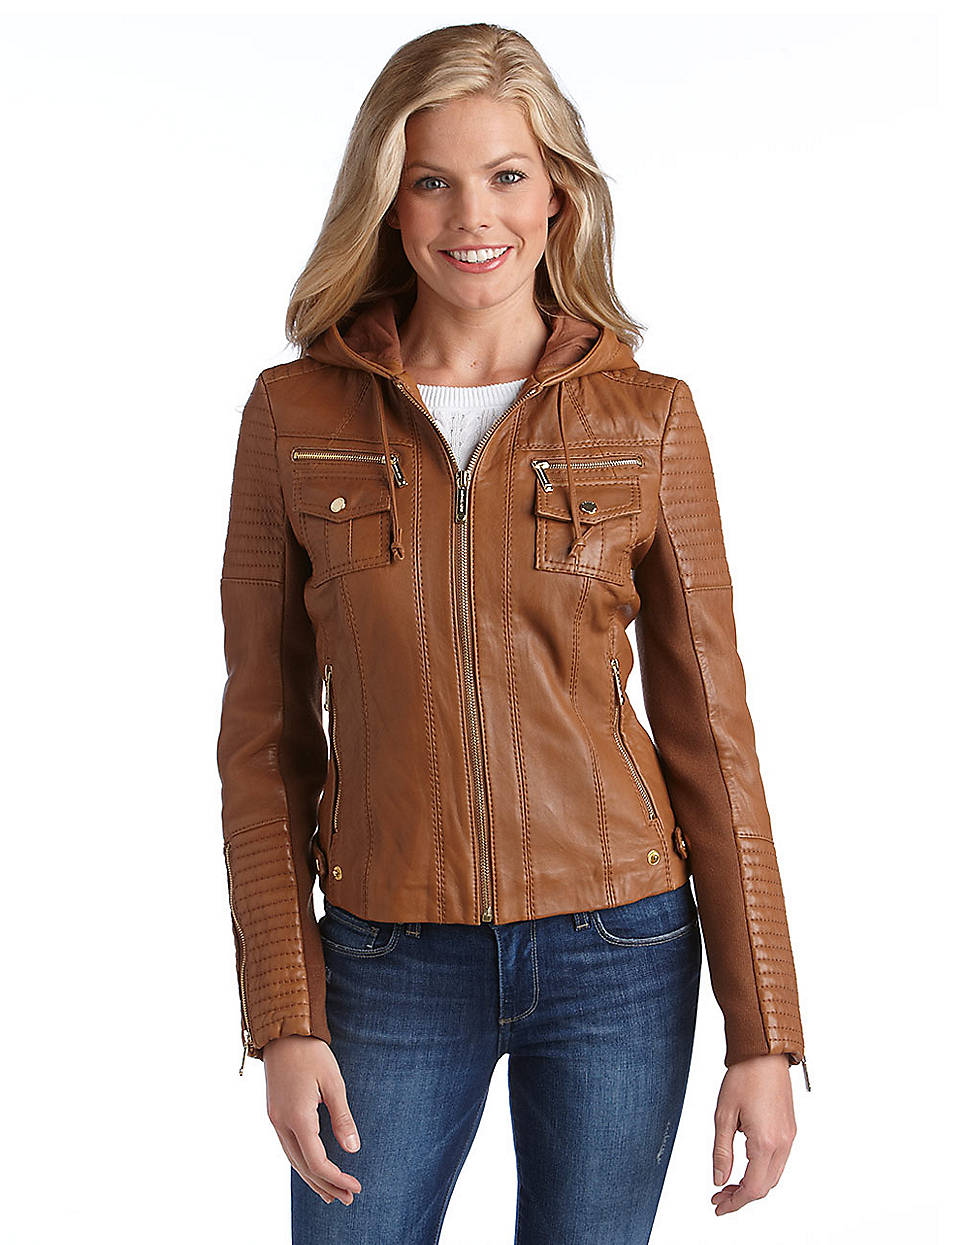 Michael Kors Hooded Leather Jacket in Brown - Lyst